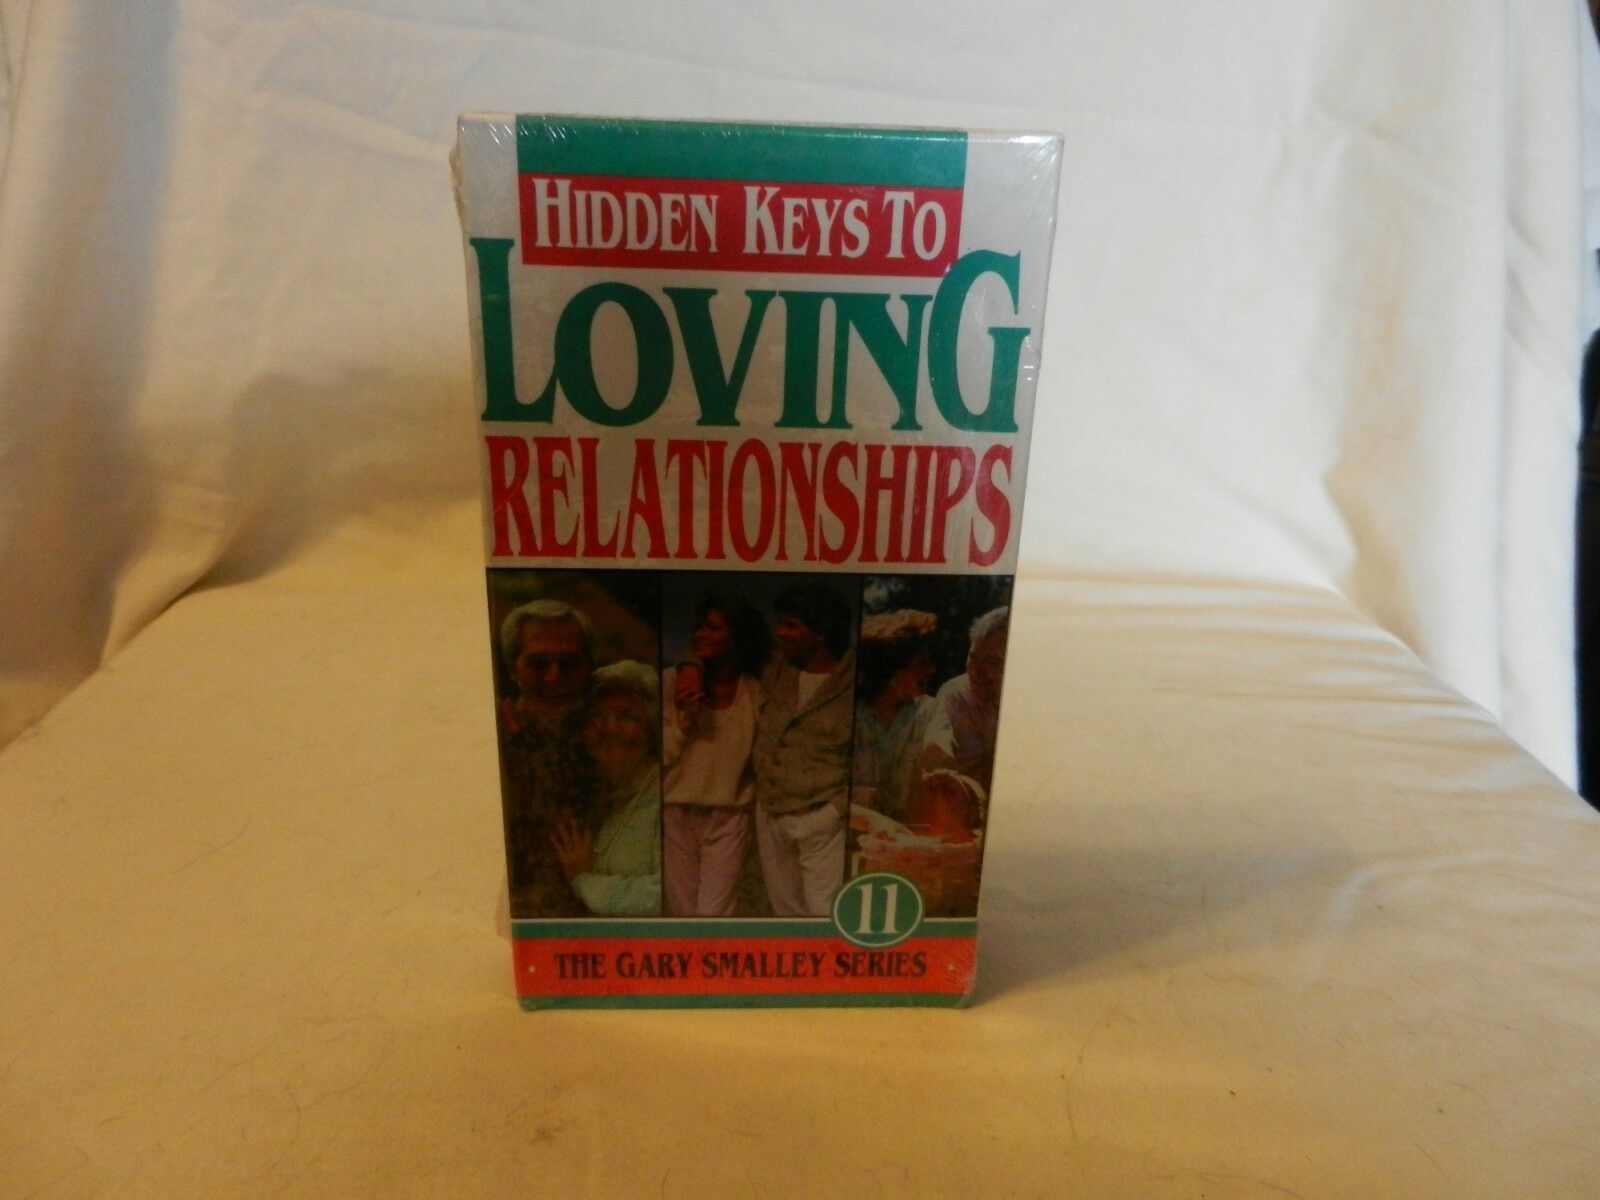 Hidden Keys To Loving Relationships 11 Gary Smalley Series Vhs Brand New Vhs Tapes 